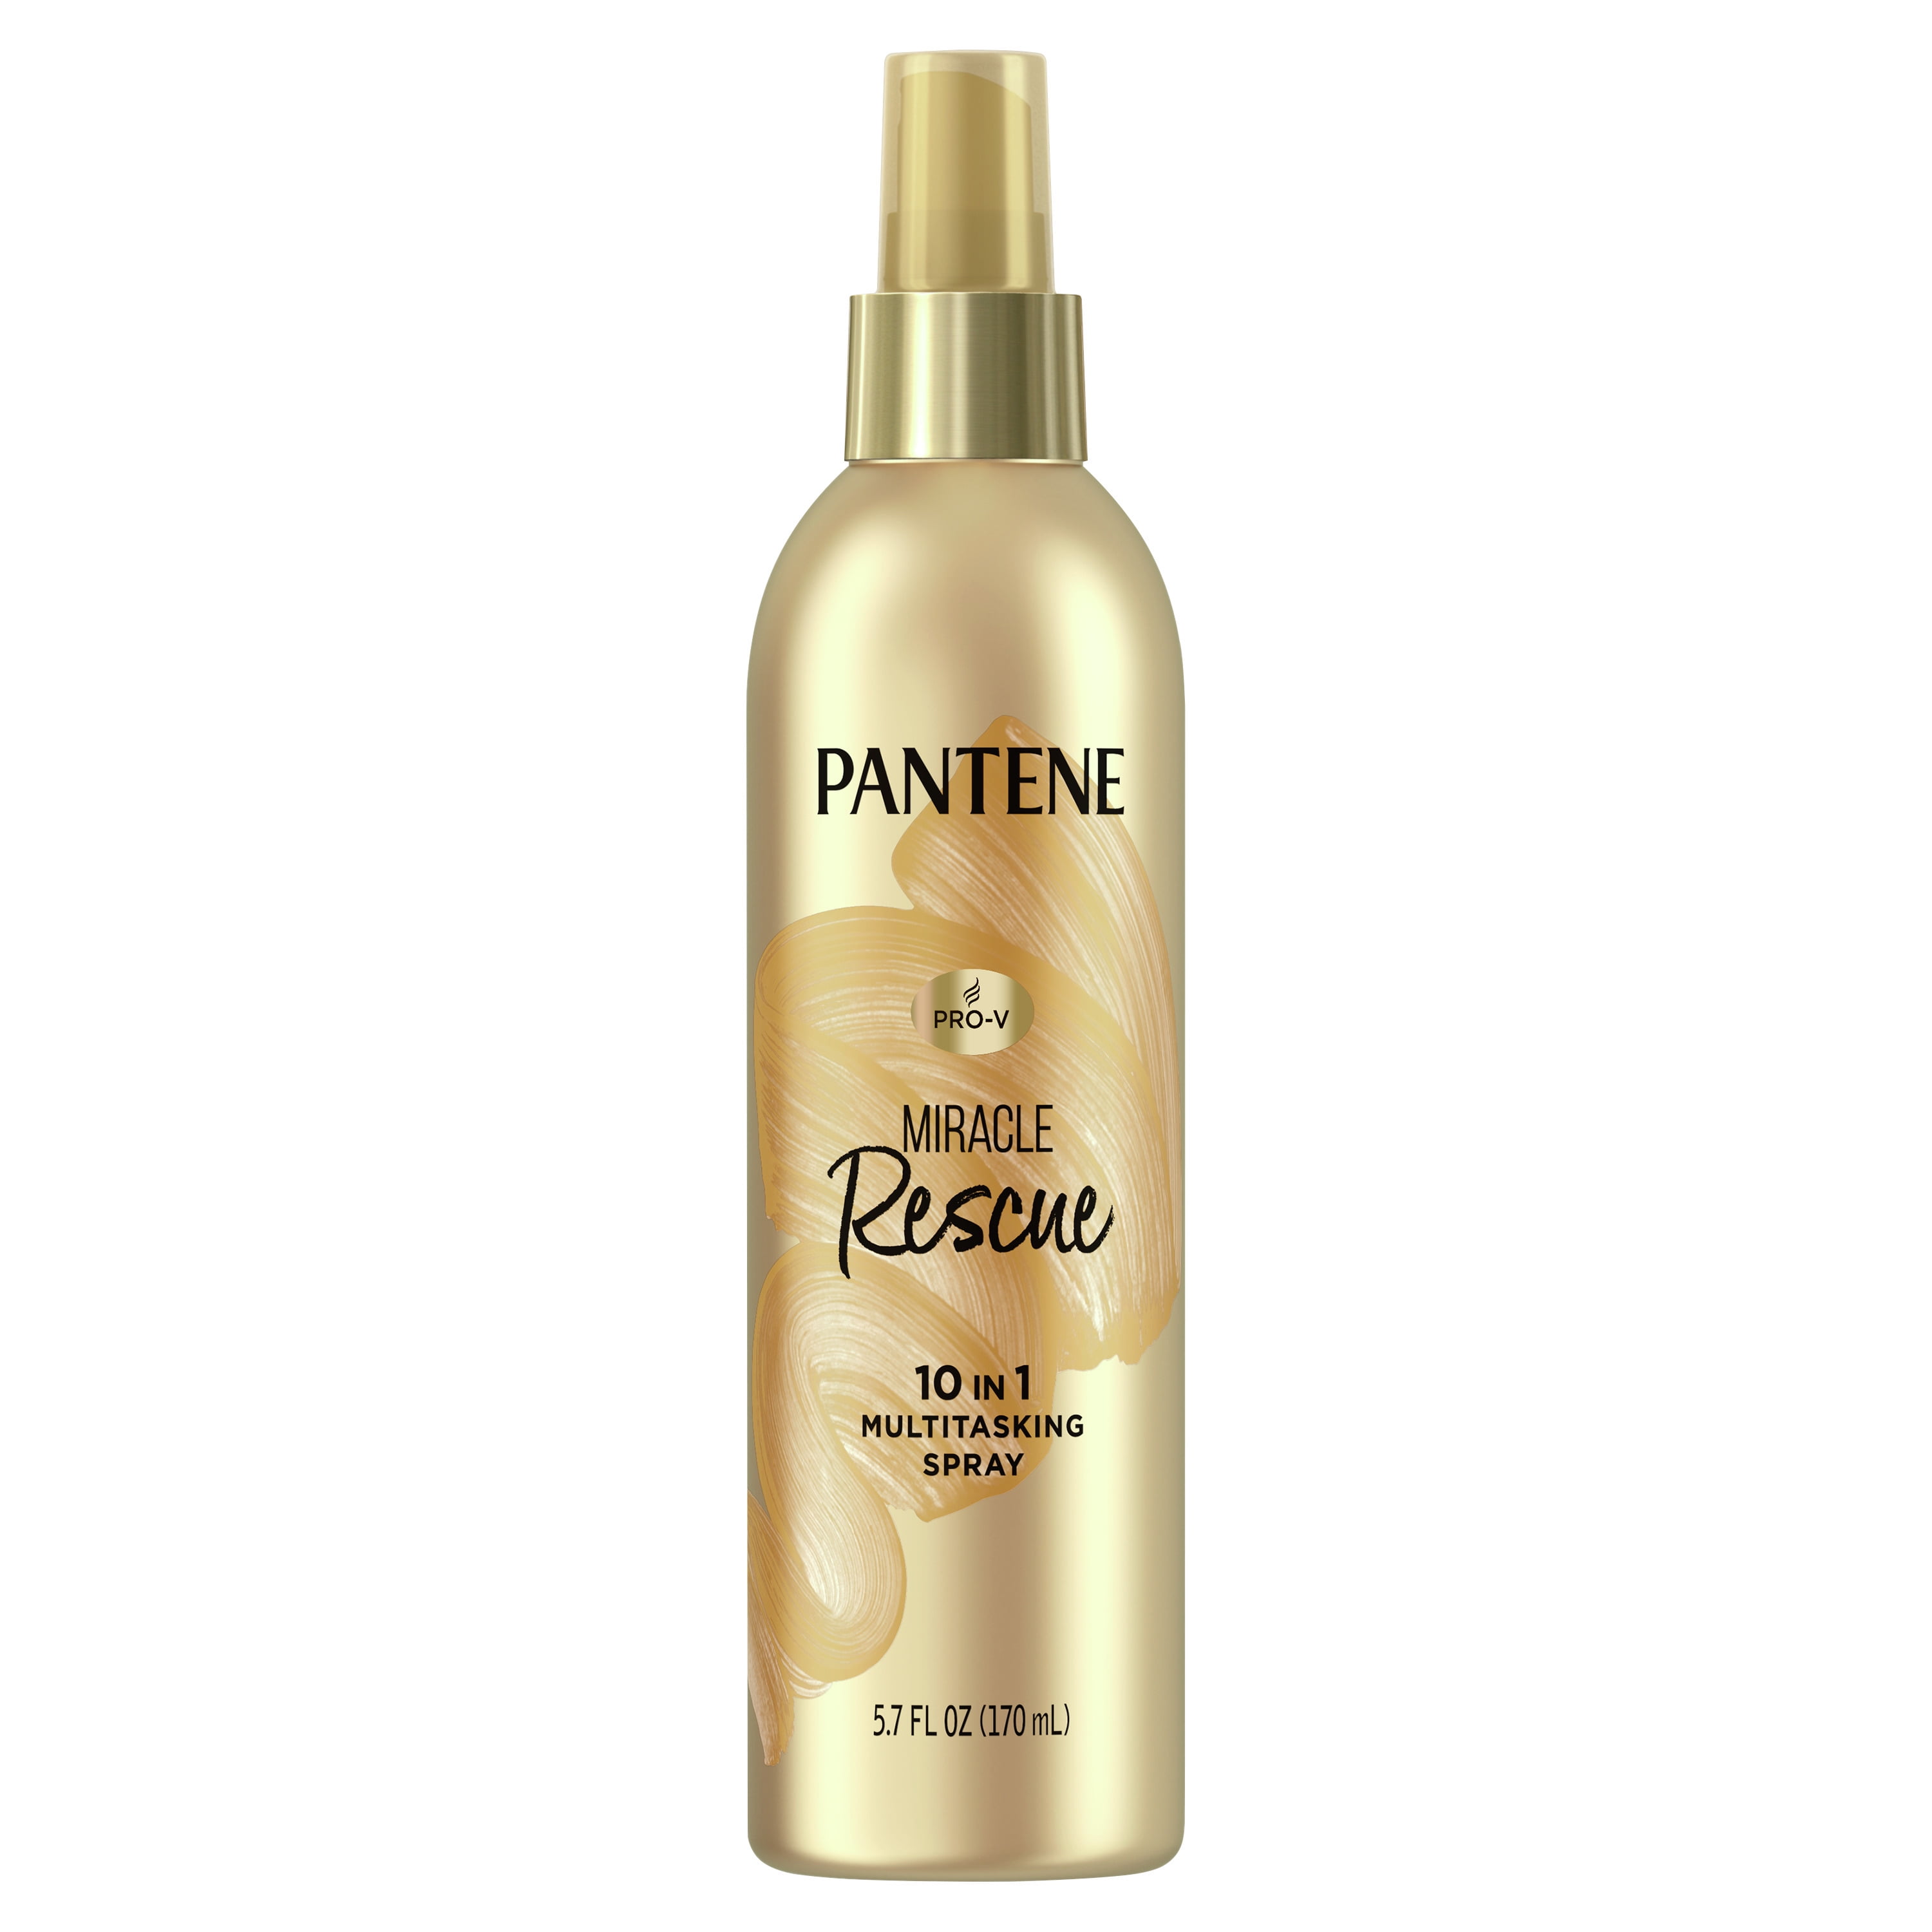 Pantene Miracle Rescue 10-in-1 Multitasking Leave-in Conditioner Spray, 5.7 fl oz